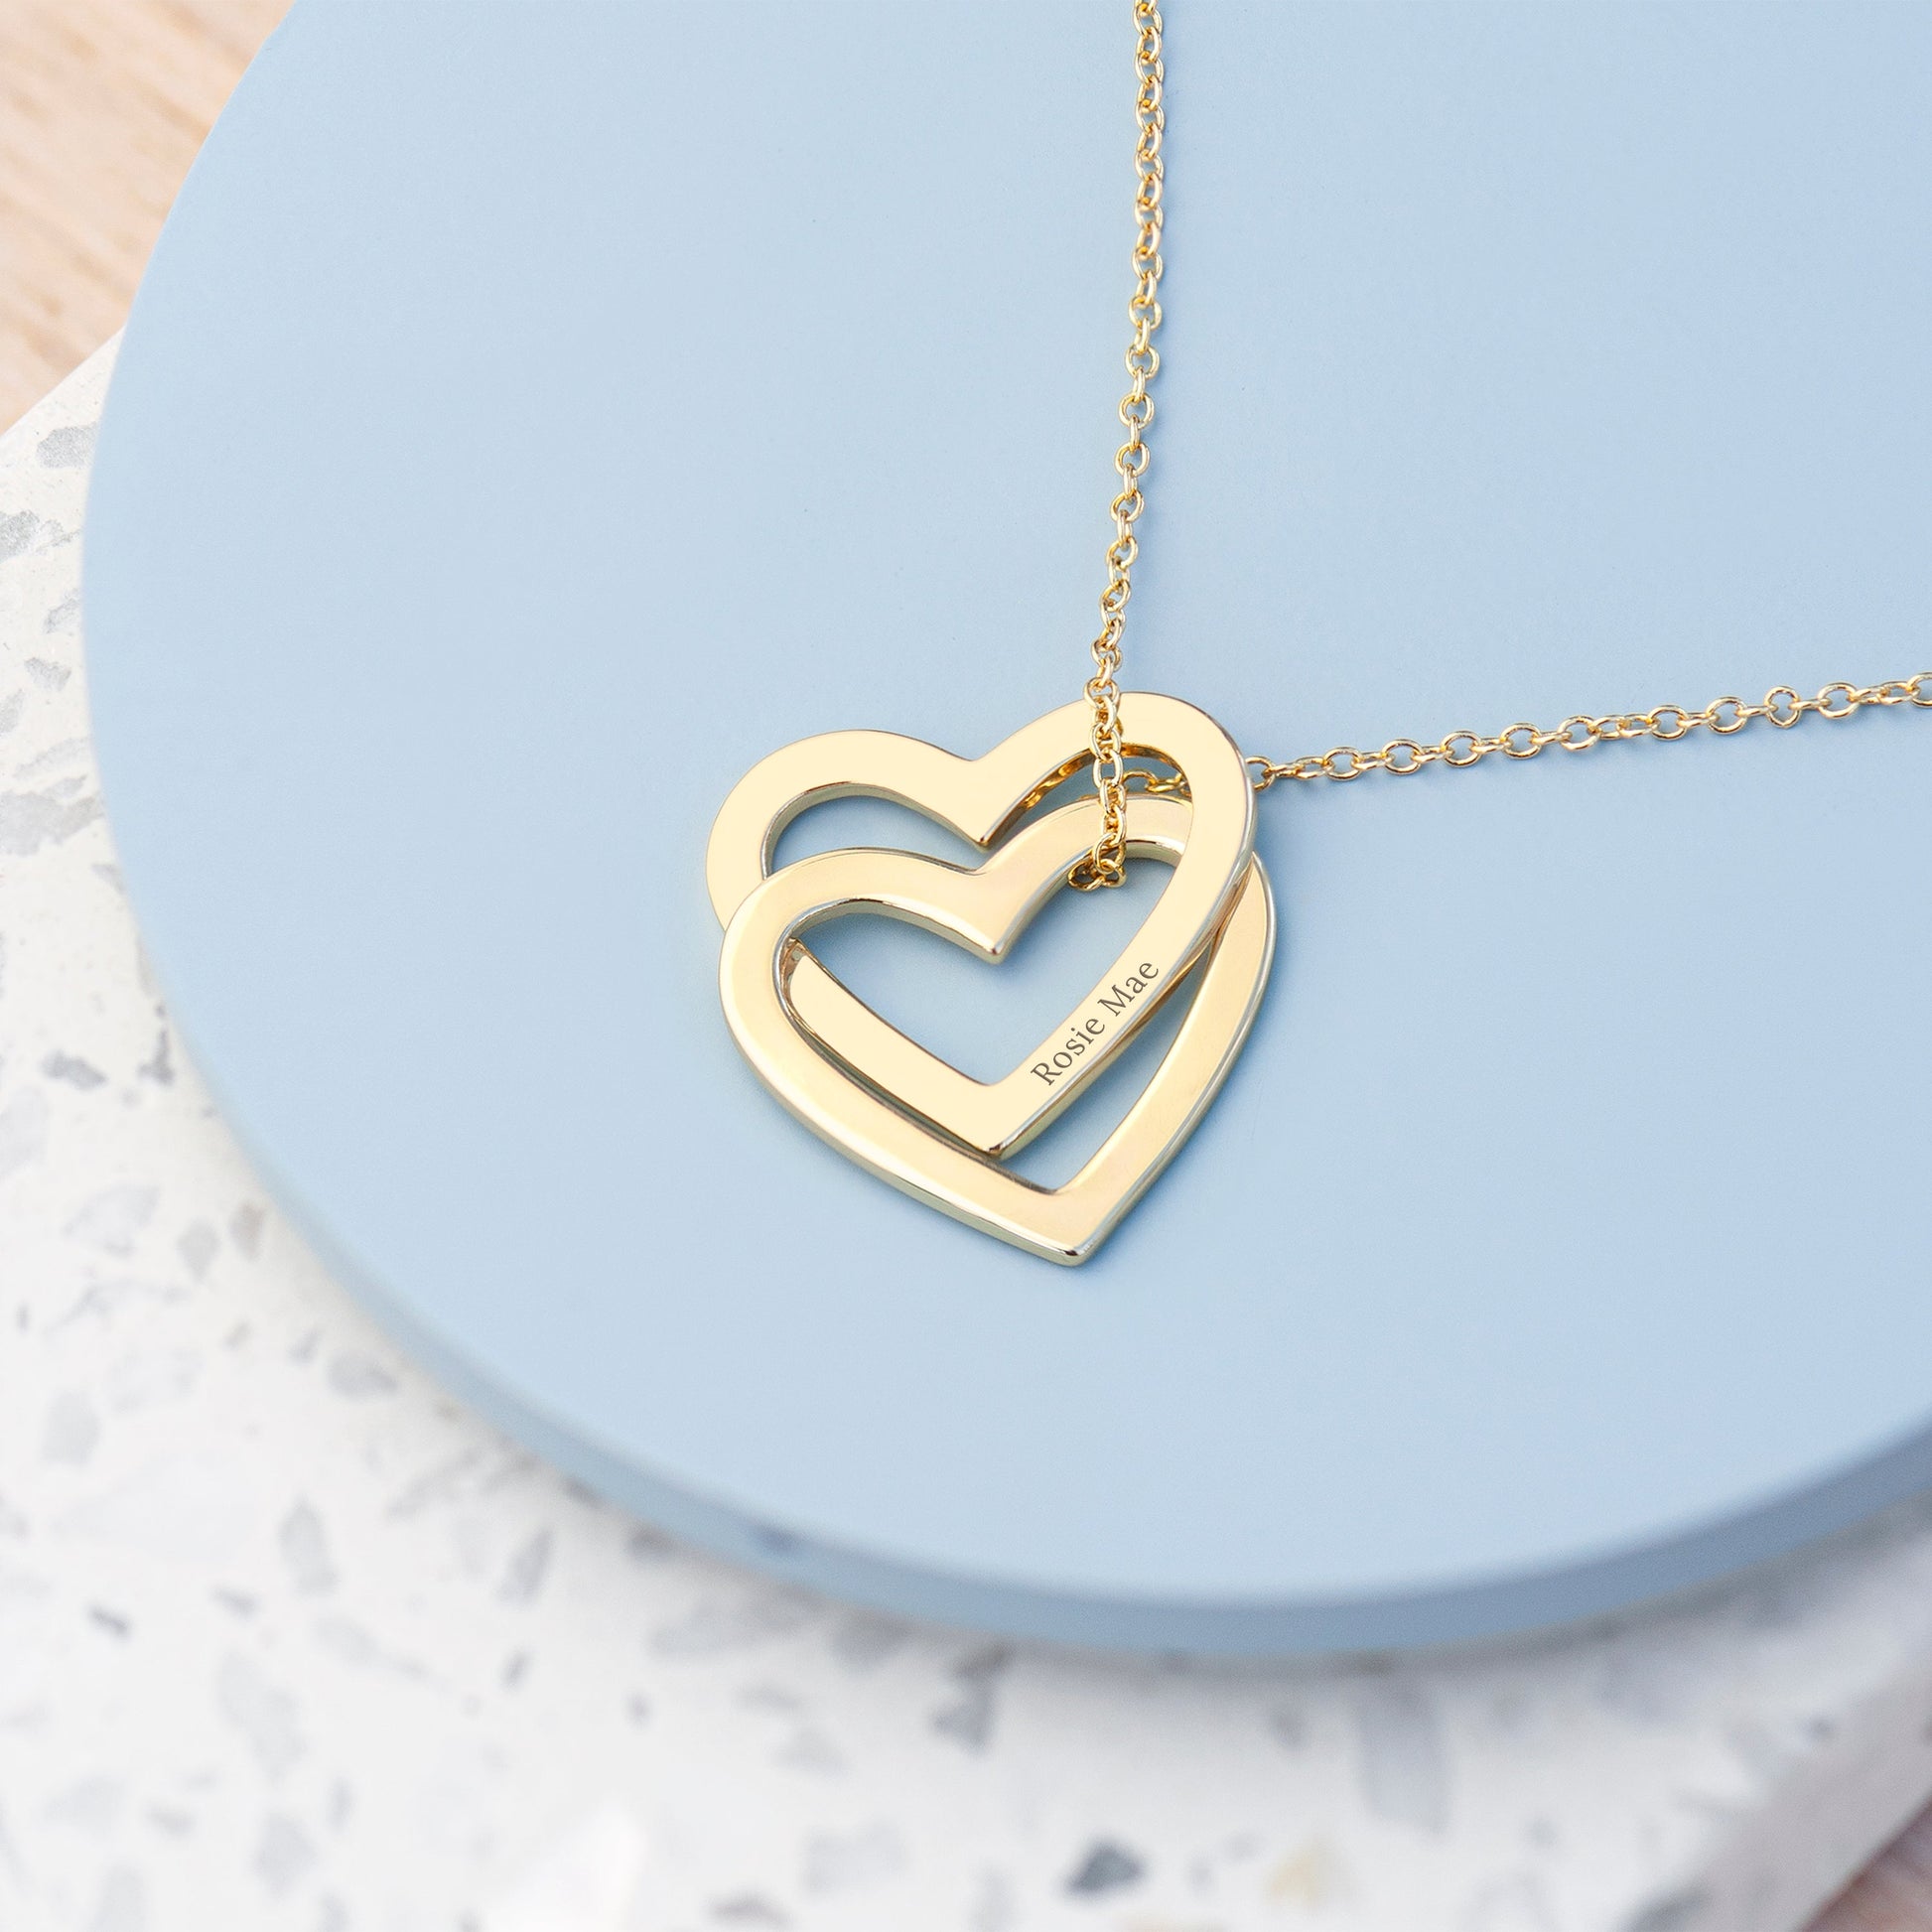 Personalized Necklaces - Personalized Entwined Hearts Necklace 